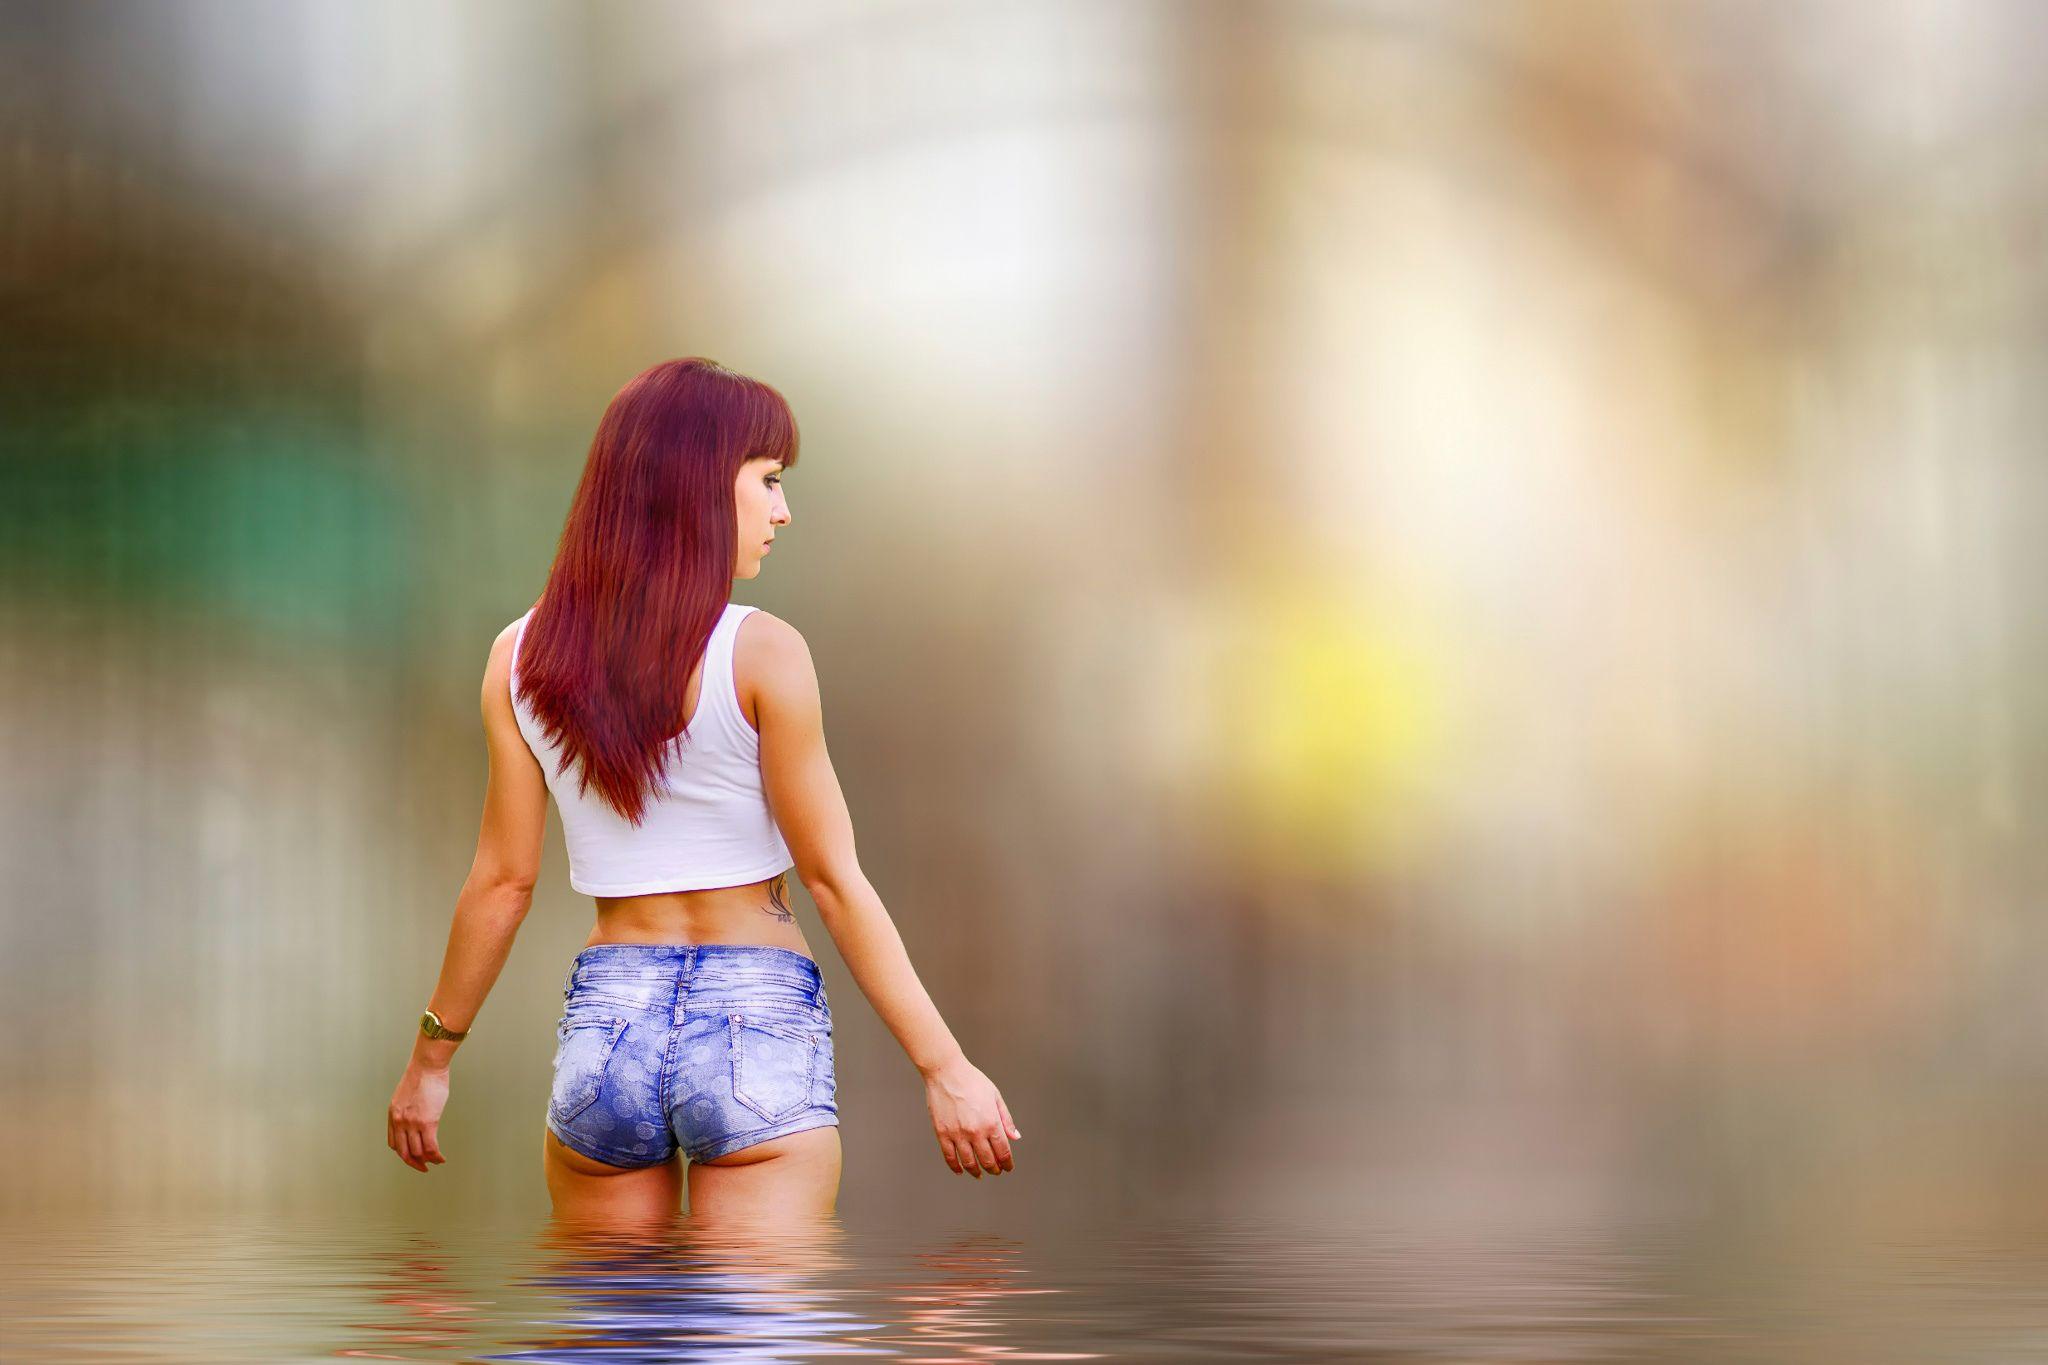 shorts, beautiful woman, relfection, water, blue jeans, lovely woman